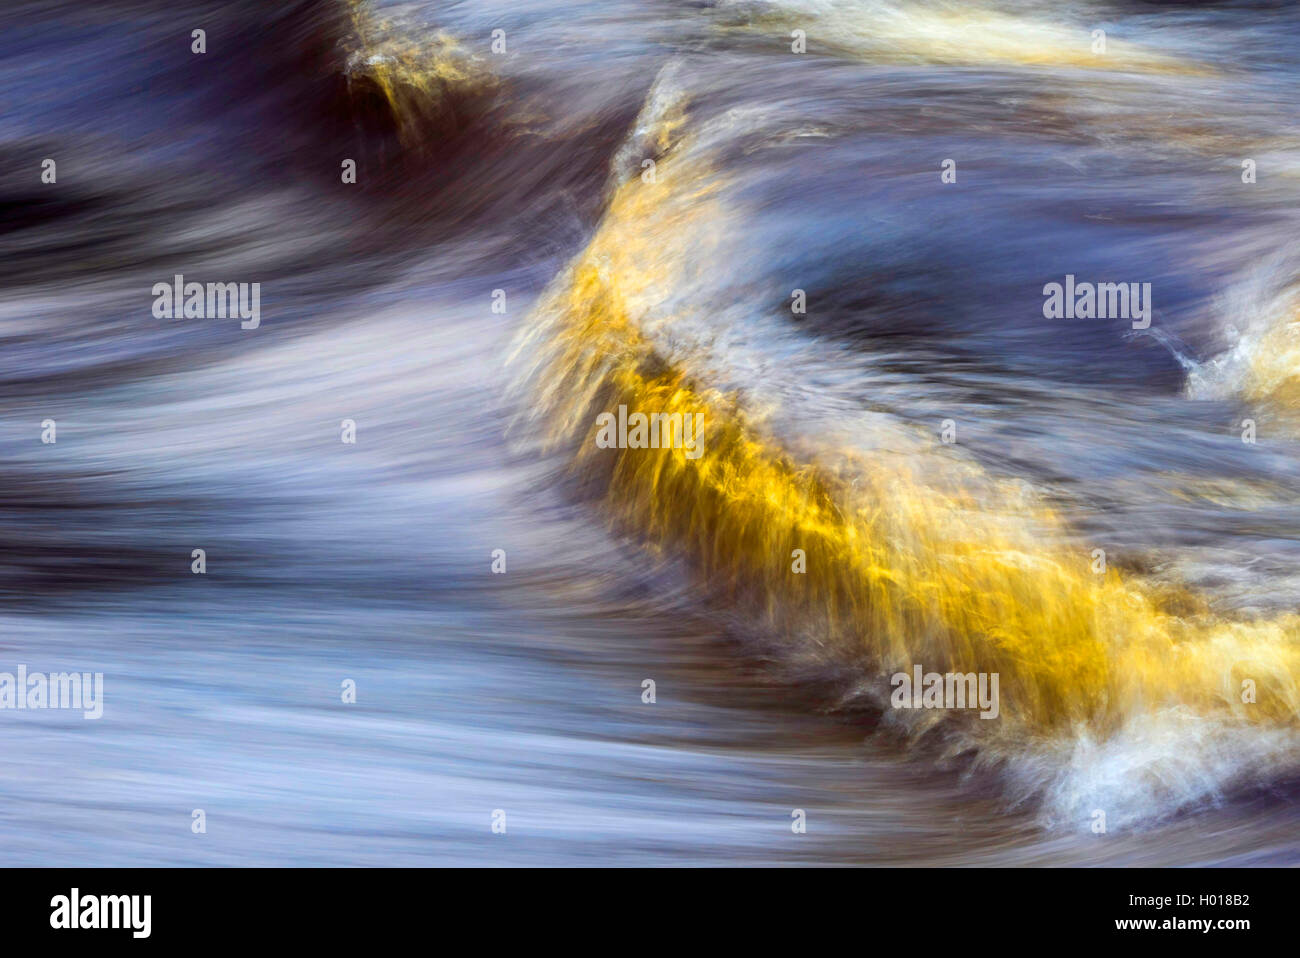 streaming water, Germany, Lower Saxony Stock Photo